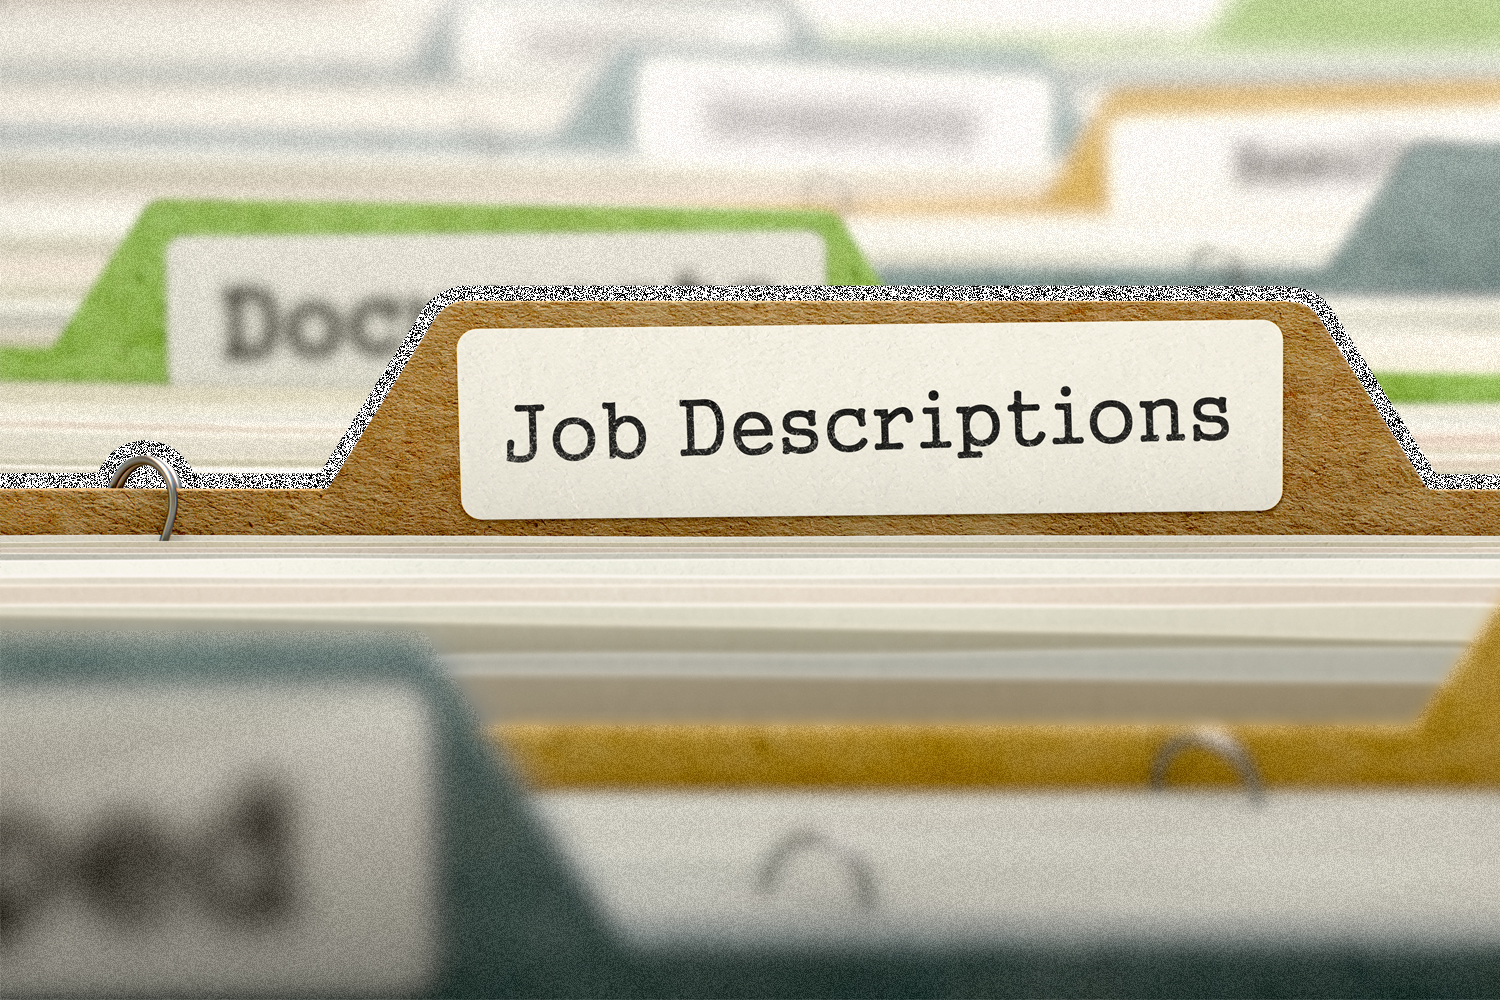 File folders with a file titled "job descriptions" in focus.